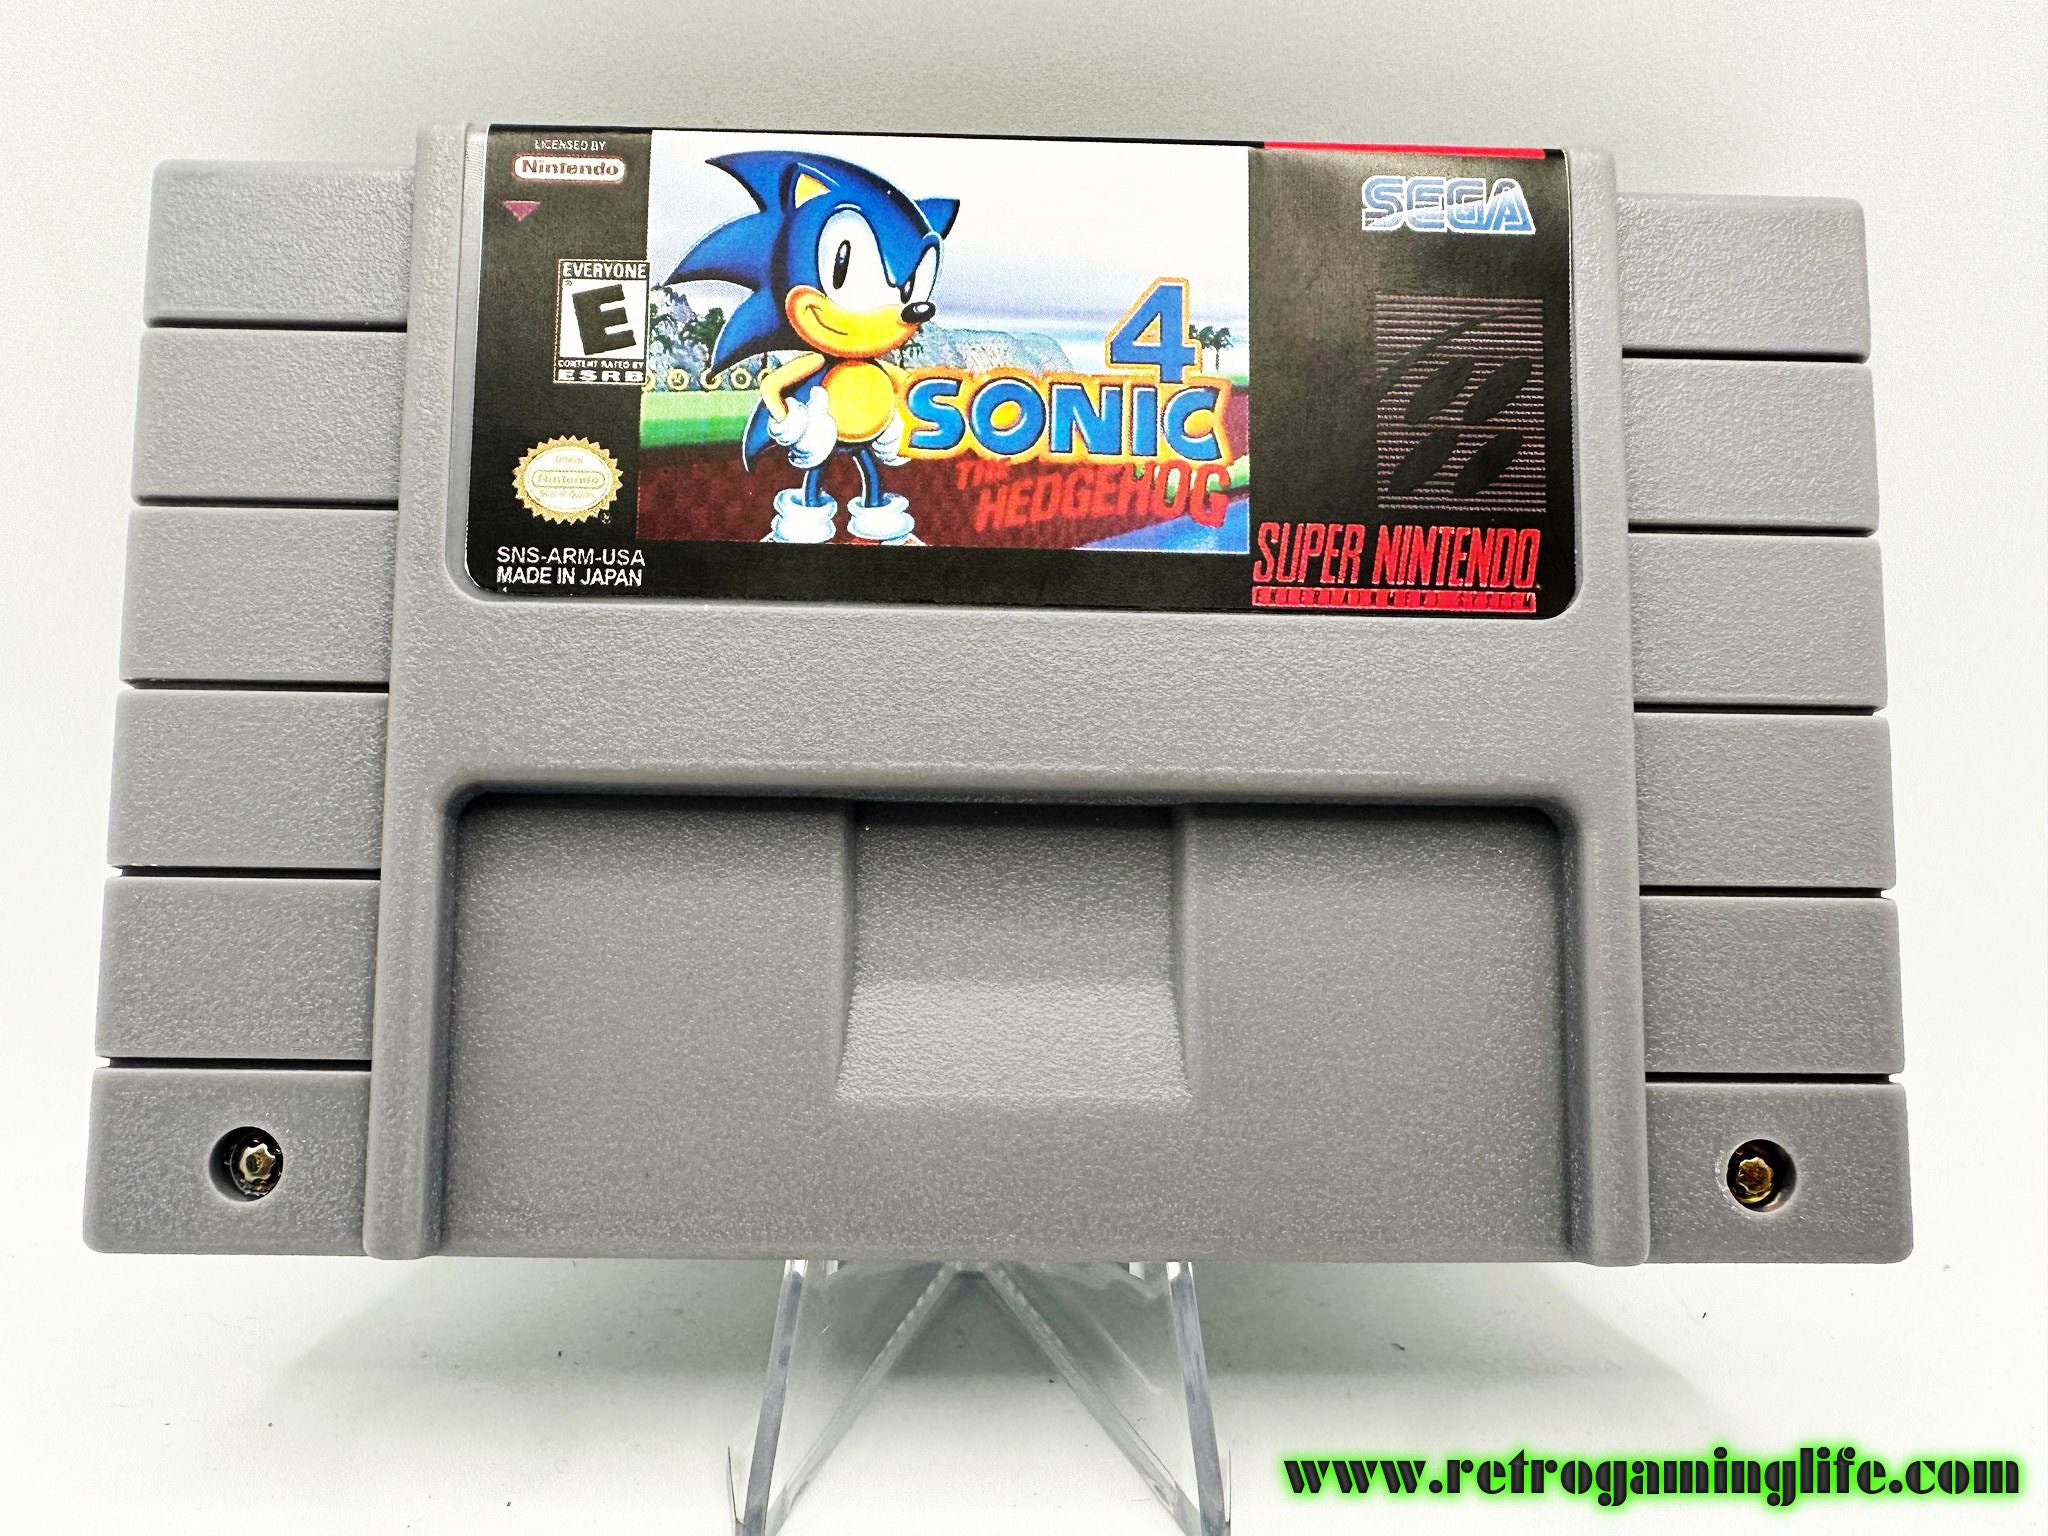 Mighty the Armadillo in Sonic the Hedgehog Sega Genesis Game -  Finland